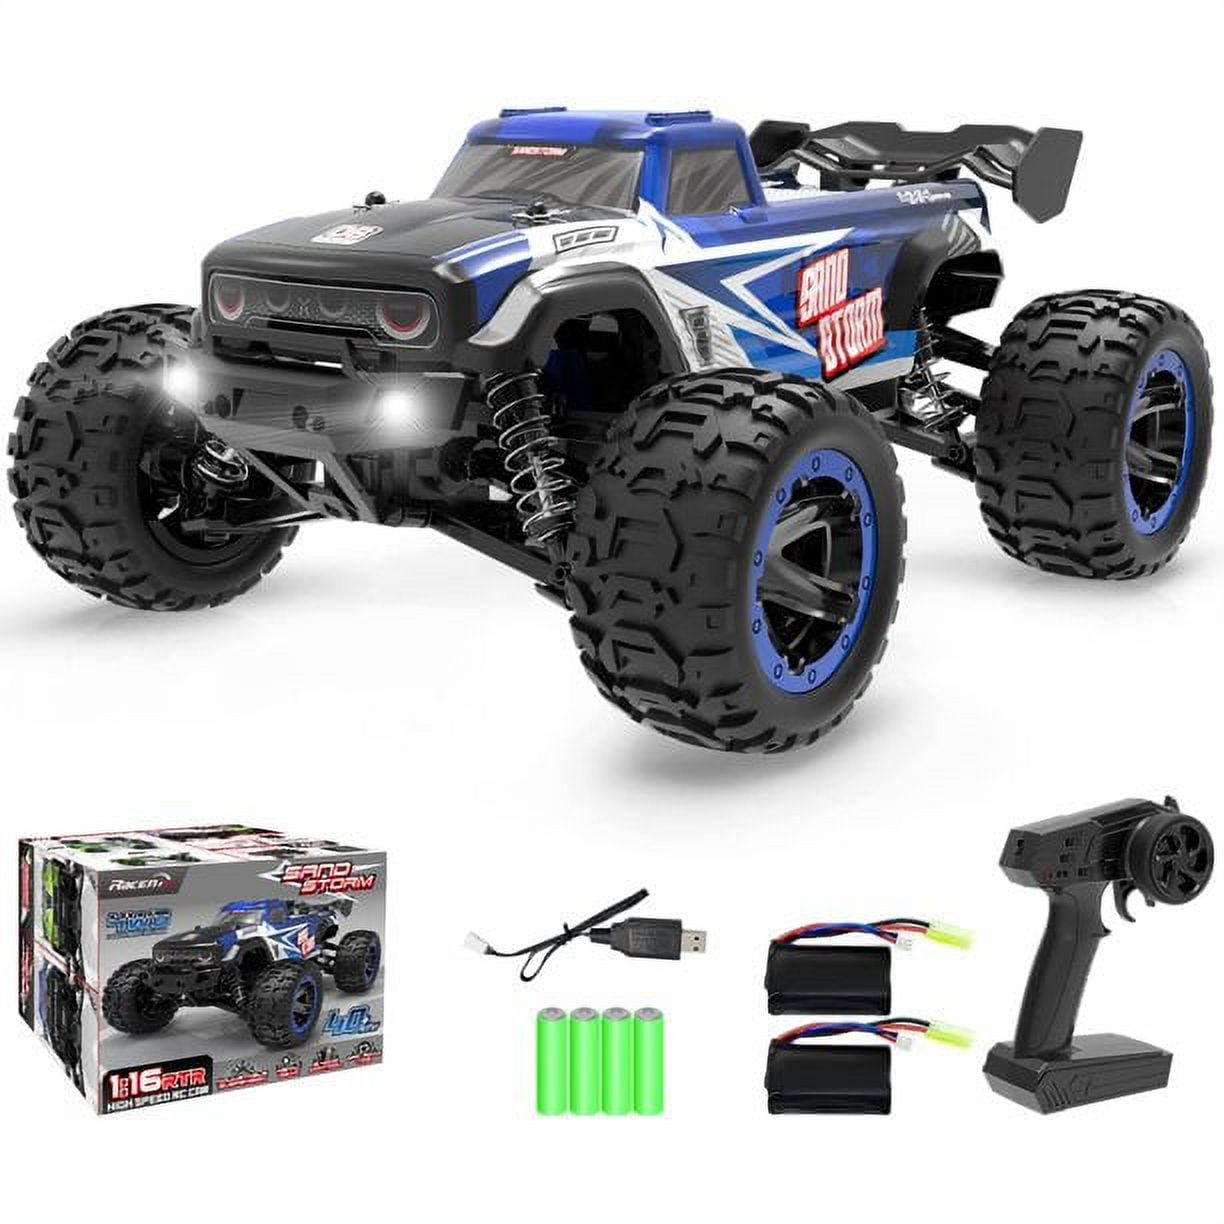 RACENT RC Truck 1/16 Remote Control Truck 30MPH High Speed 4x4 Off